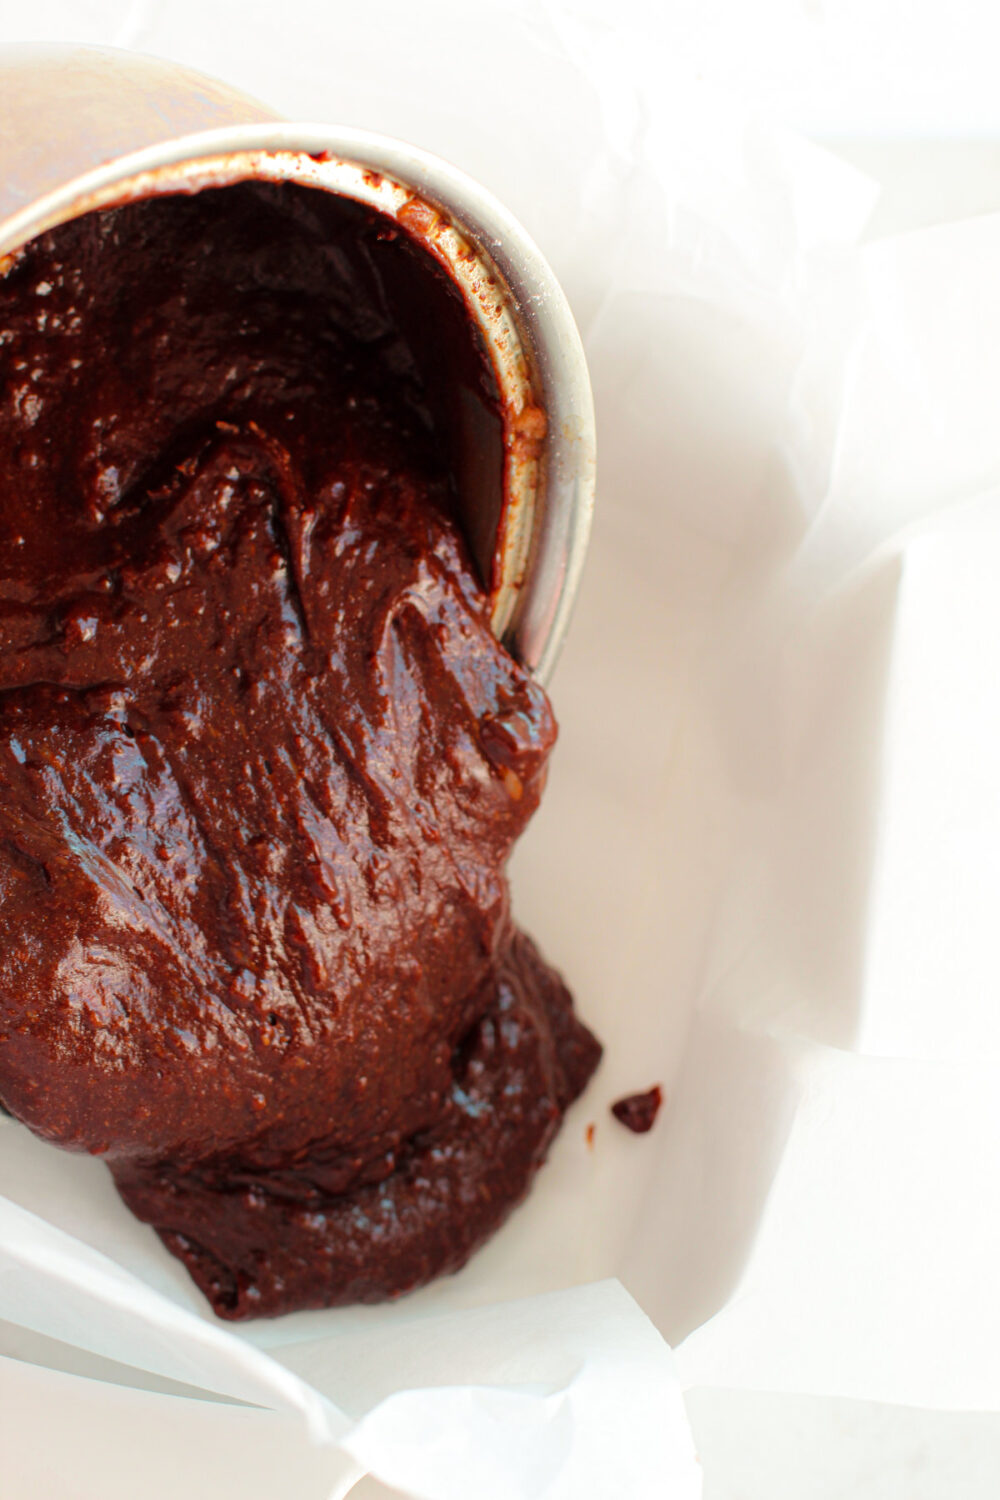 Pouring brownie batter into a pan.